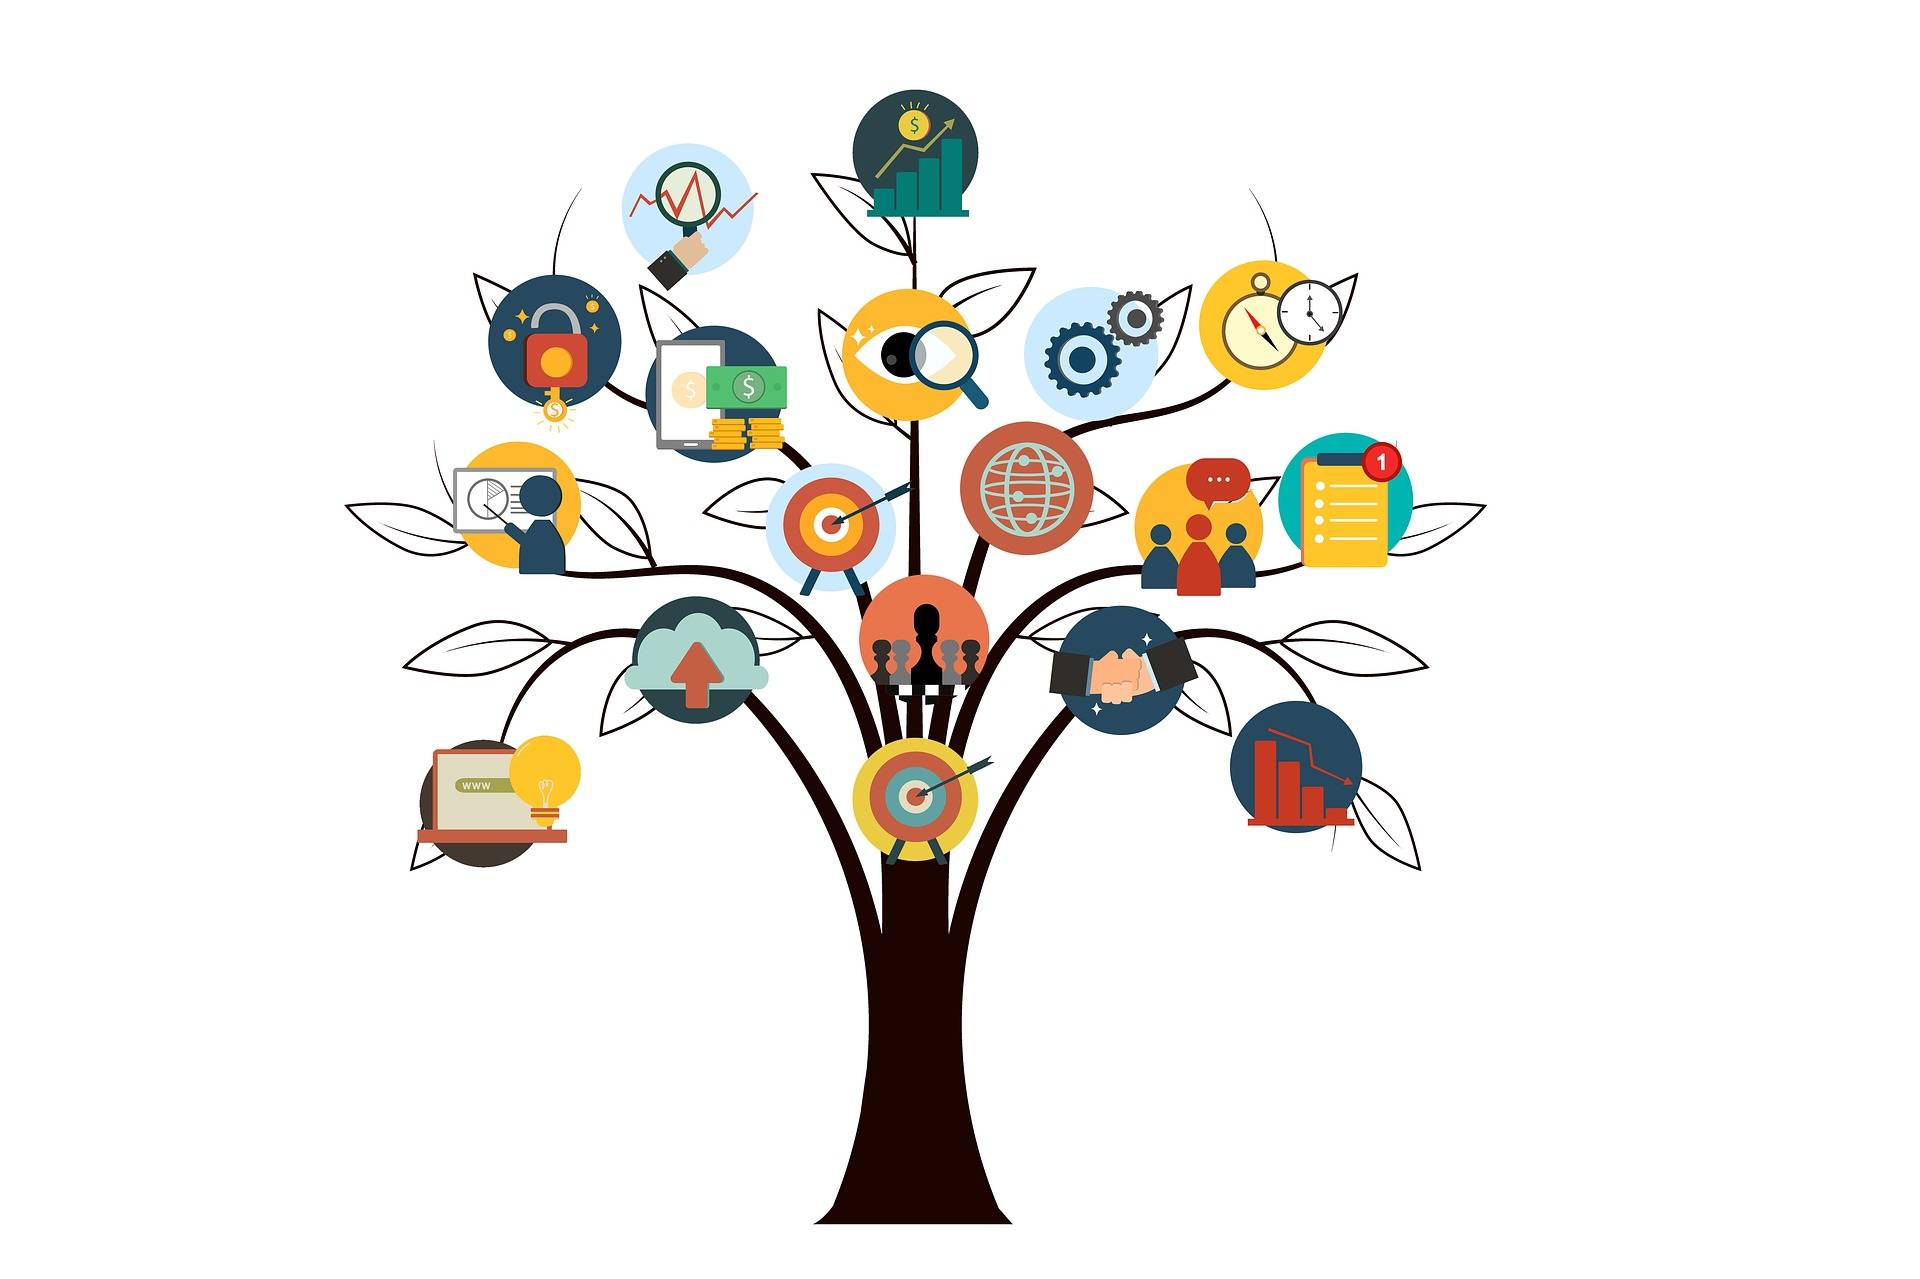 tree figure with icons